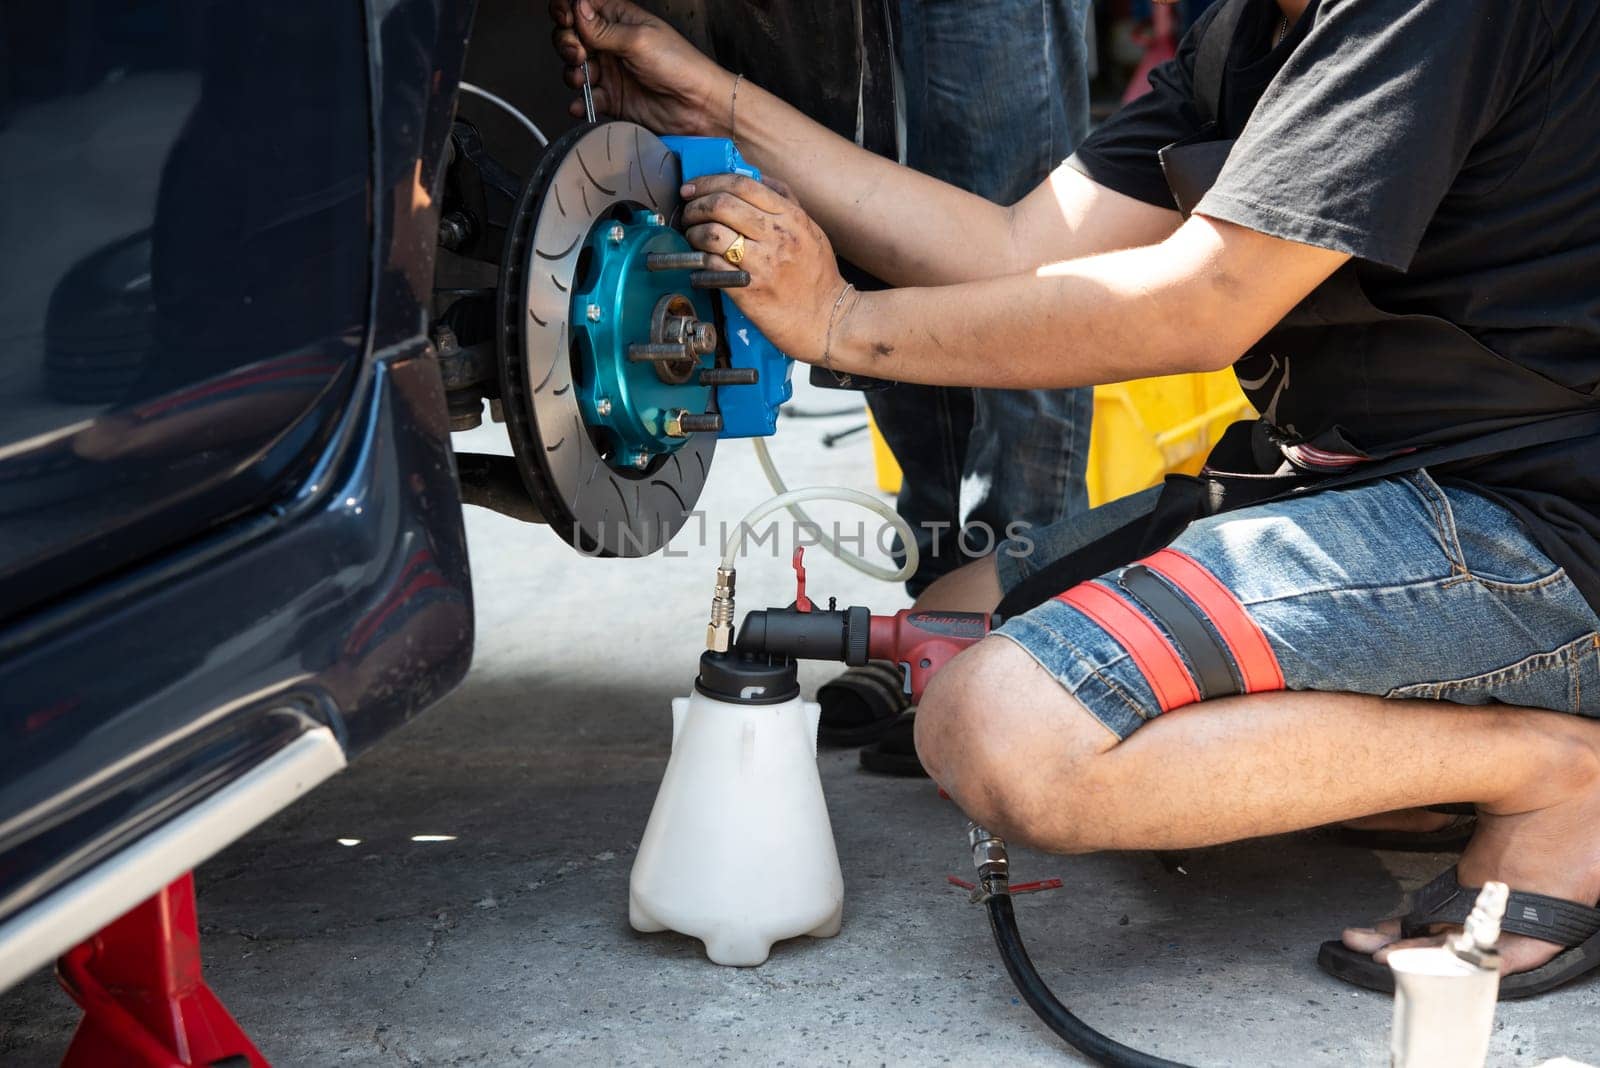 Bangkok, Thailand - March 6, 2021 : Unidentified car mechanic or serviceman disassembly and checking a disc brake and asbestos brake pads for fix and repair problem at car garage or repair shop